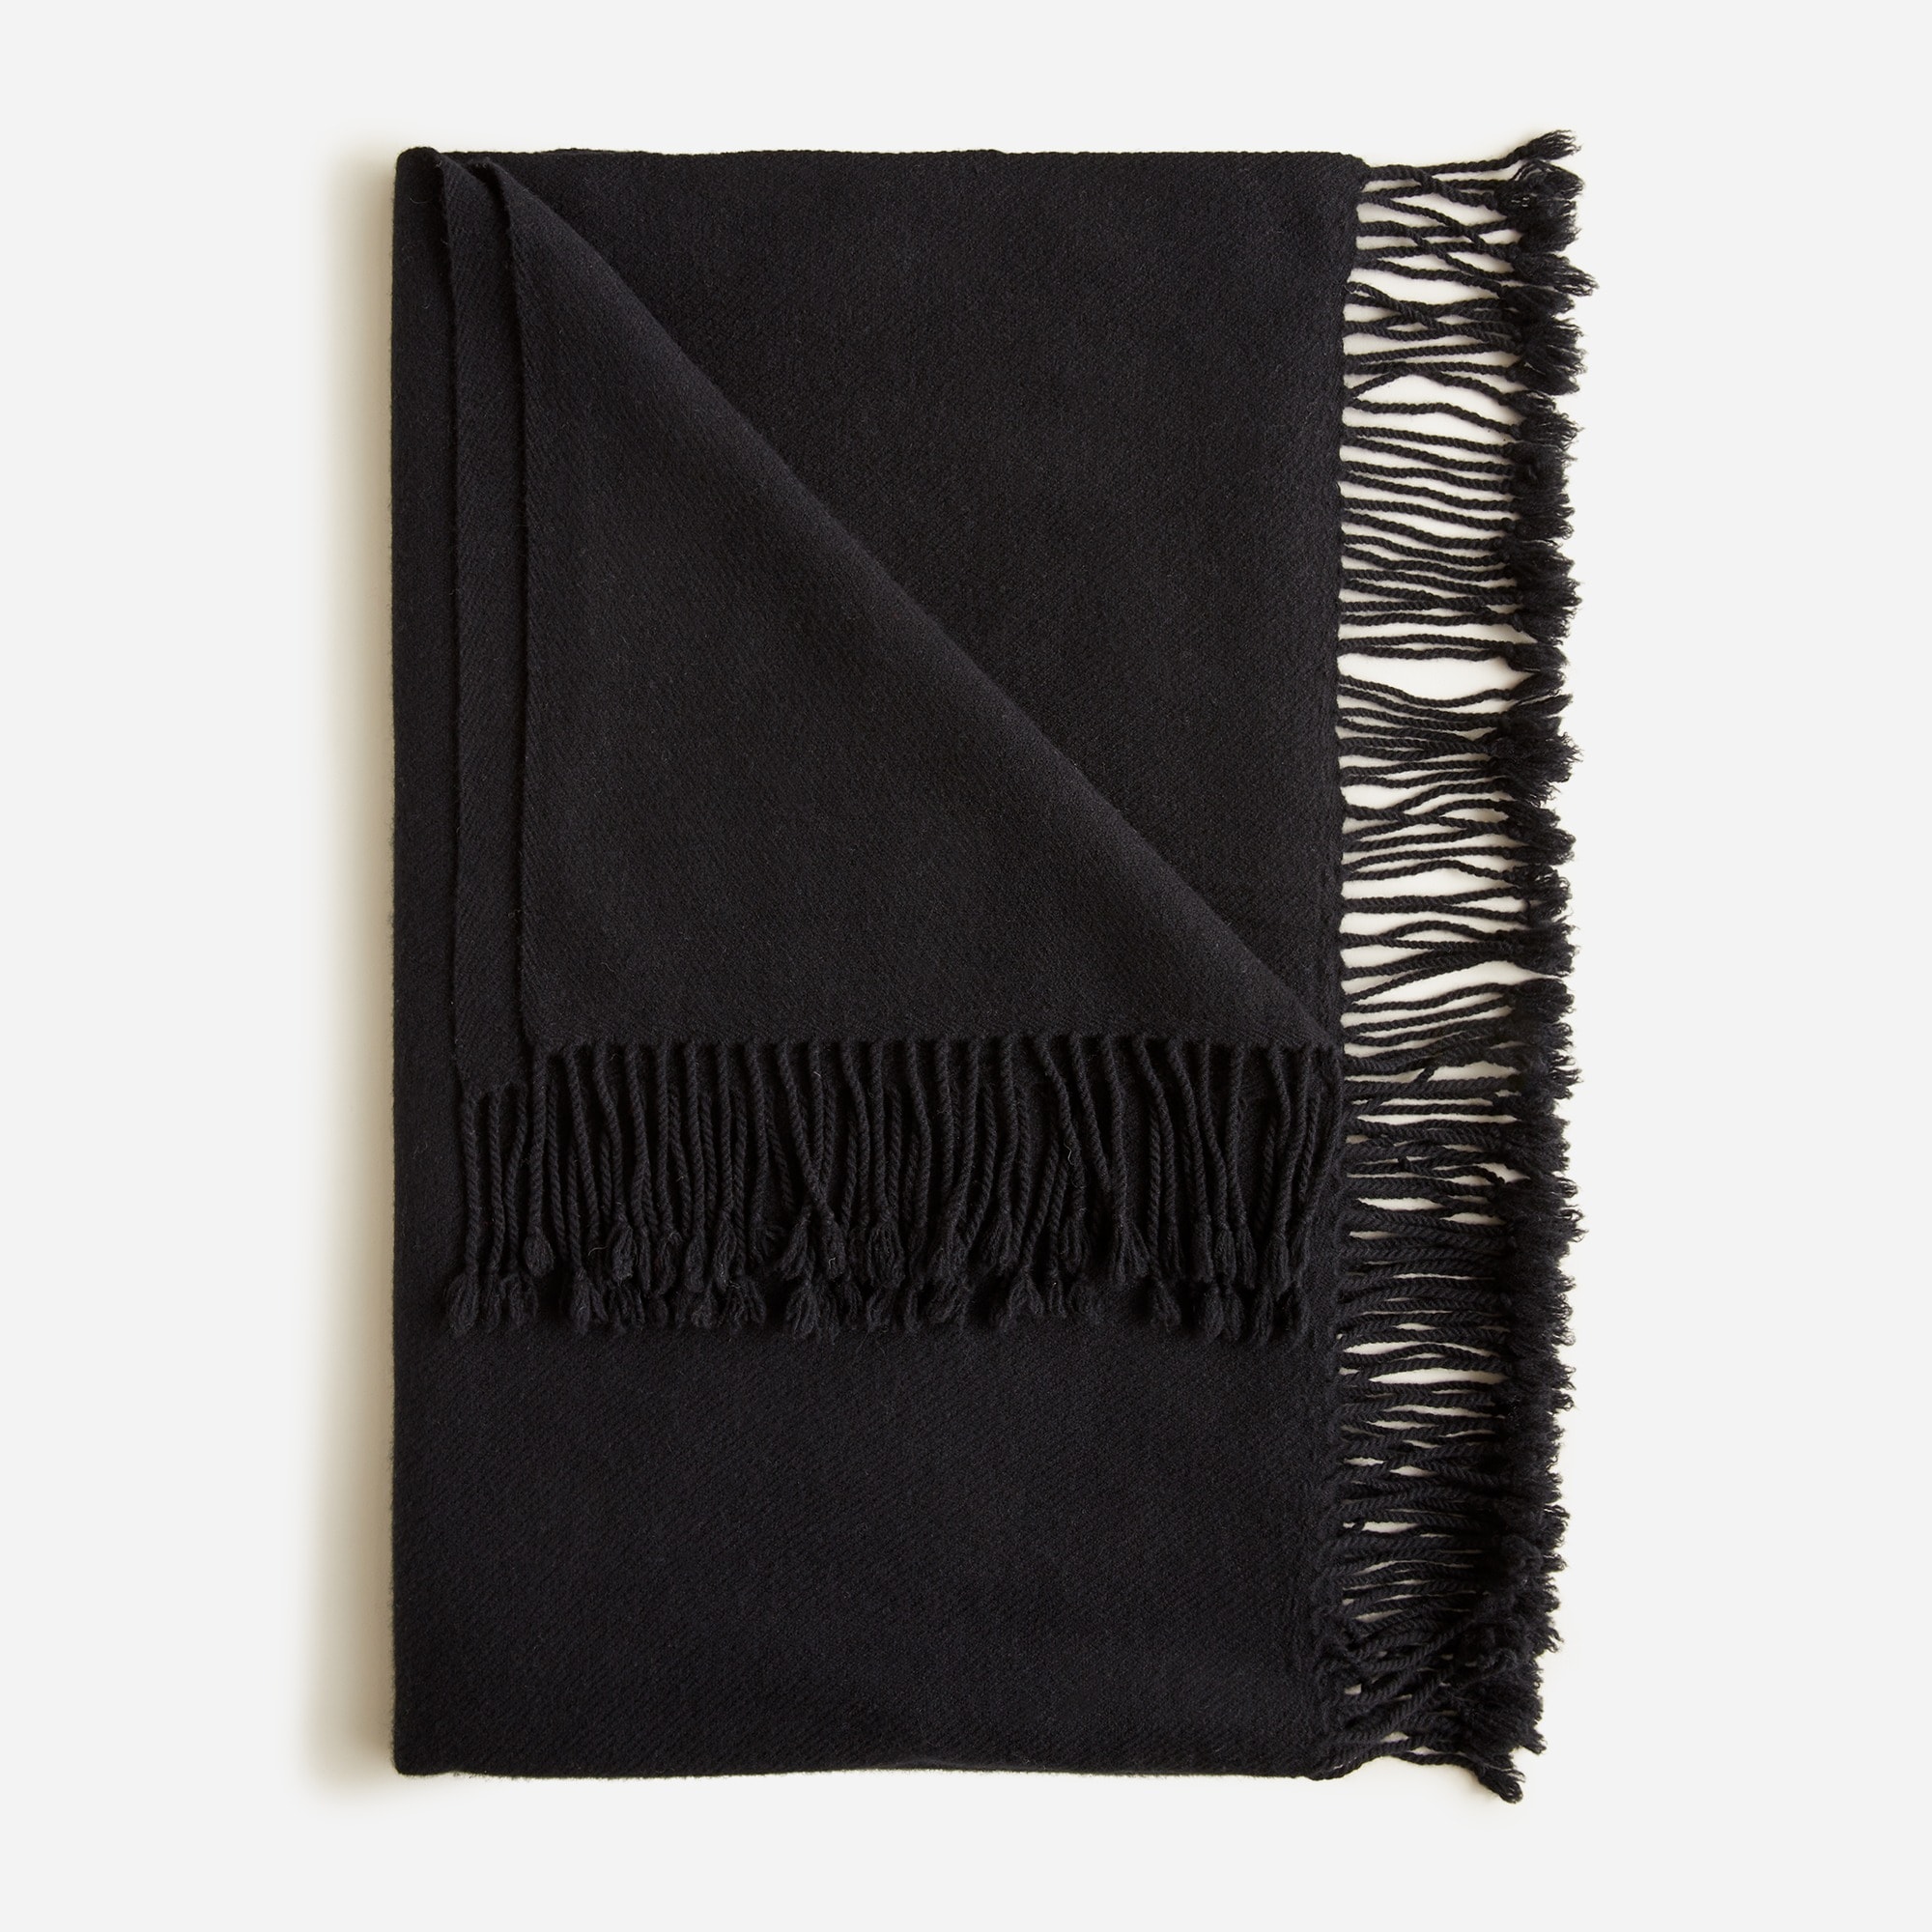 Jcrew J.Crew Home solid cashmere throw